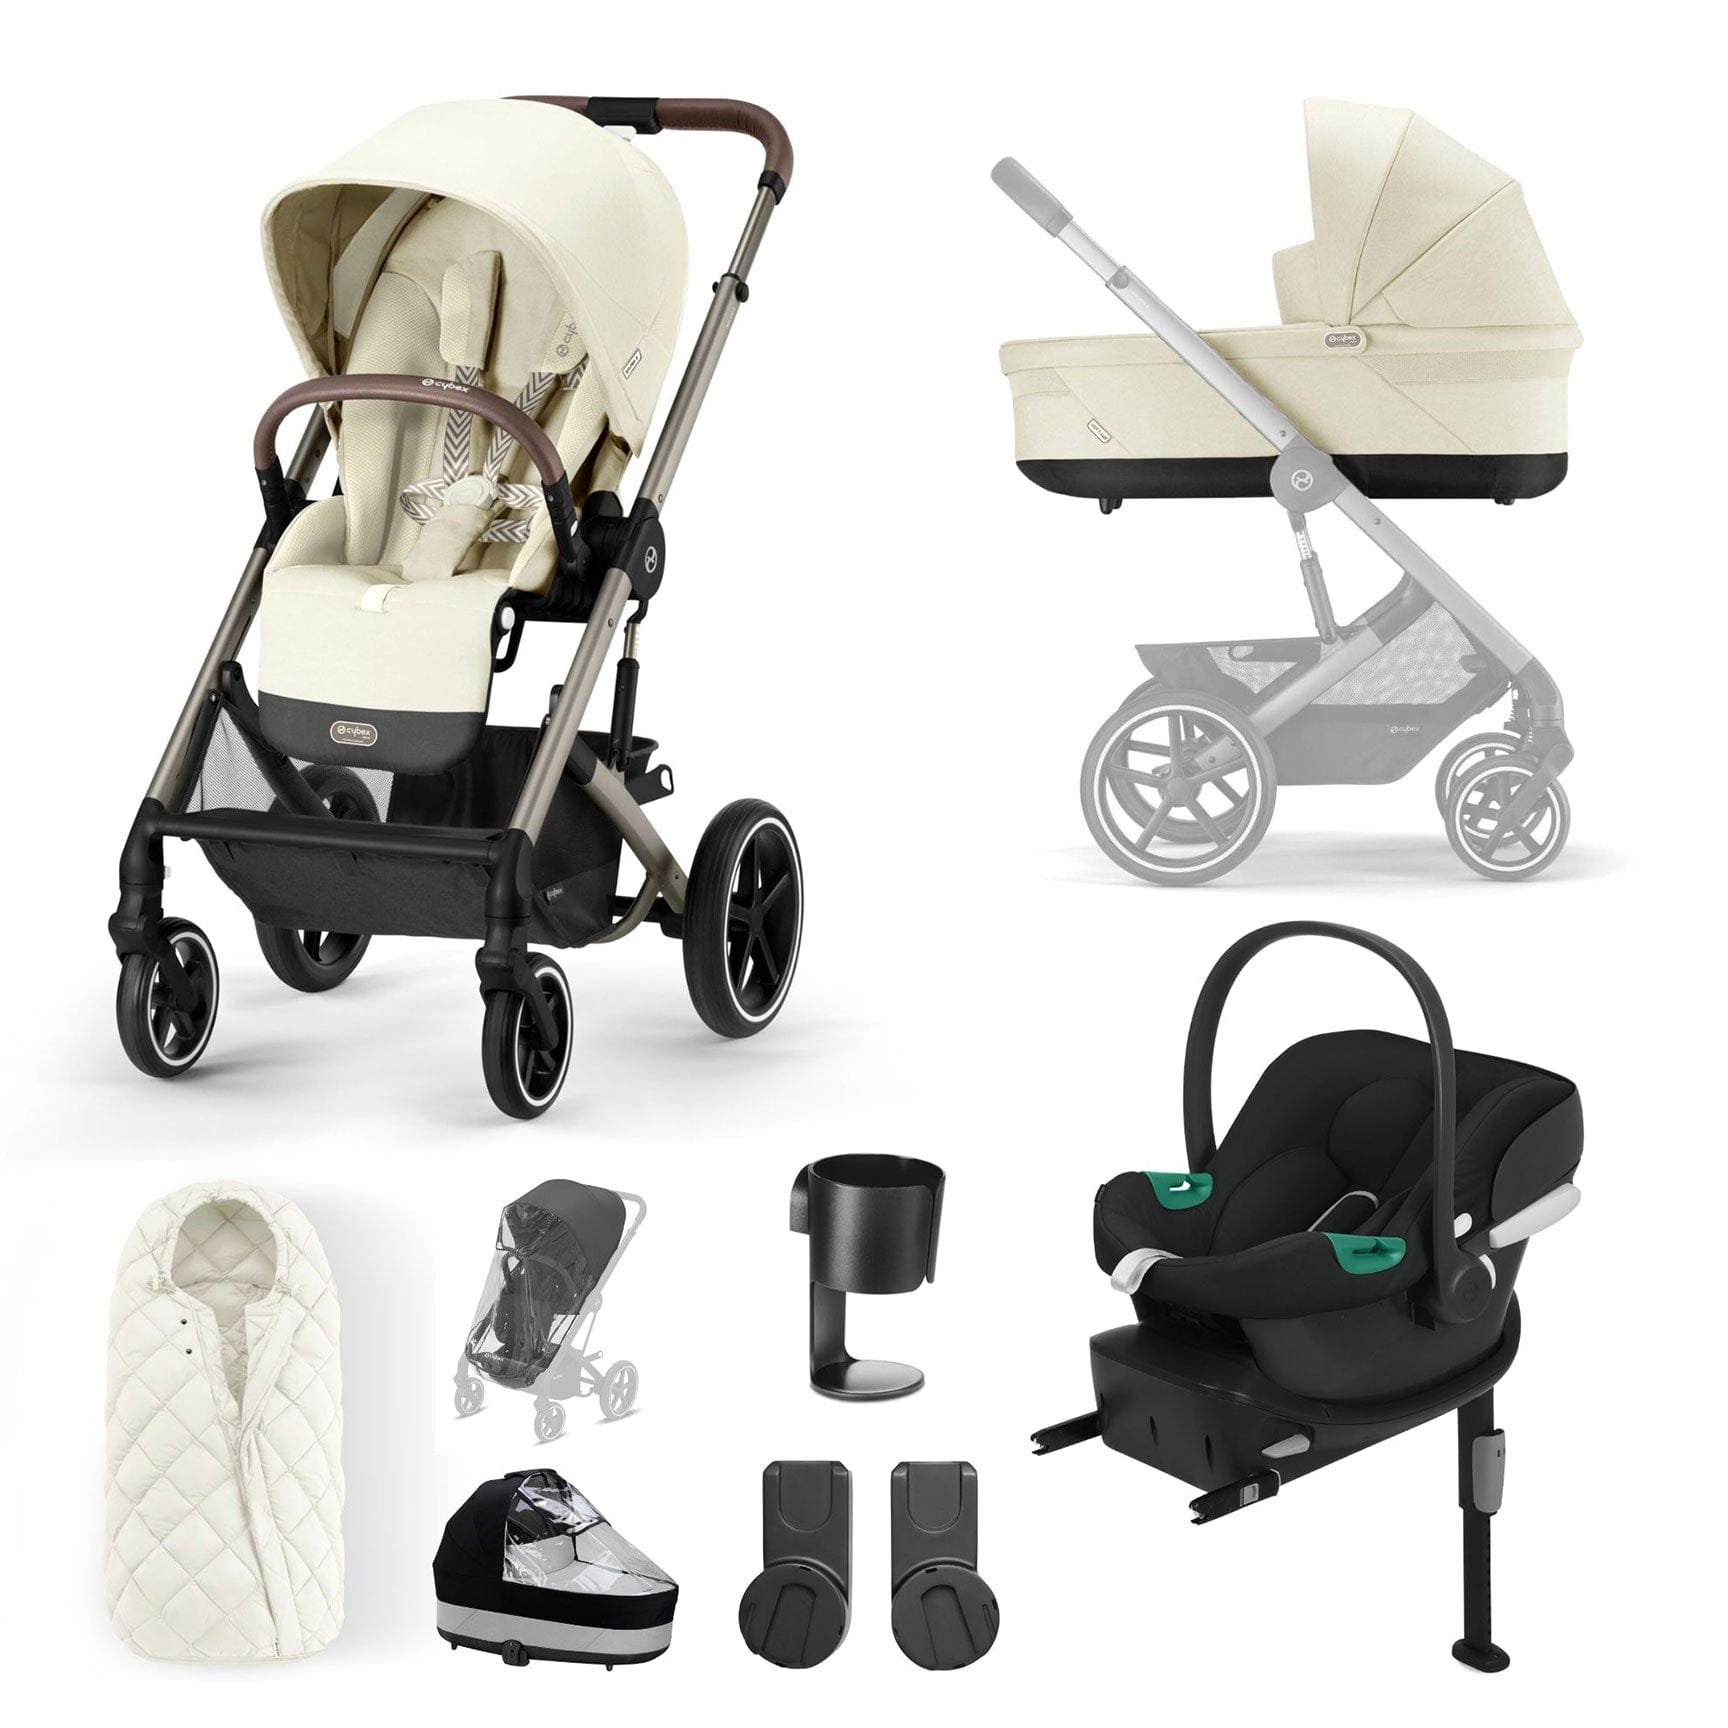 Cybex Balios Comfort Bundle in Taupe/Seashell Beige Travel Systems 127457-TPE-SEA-BEI 4063846318124